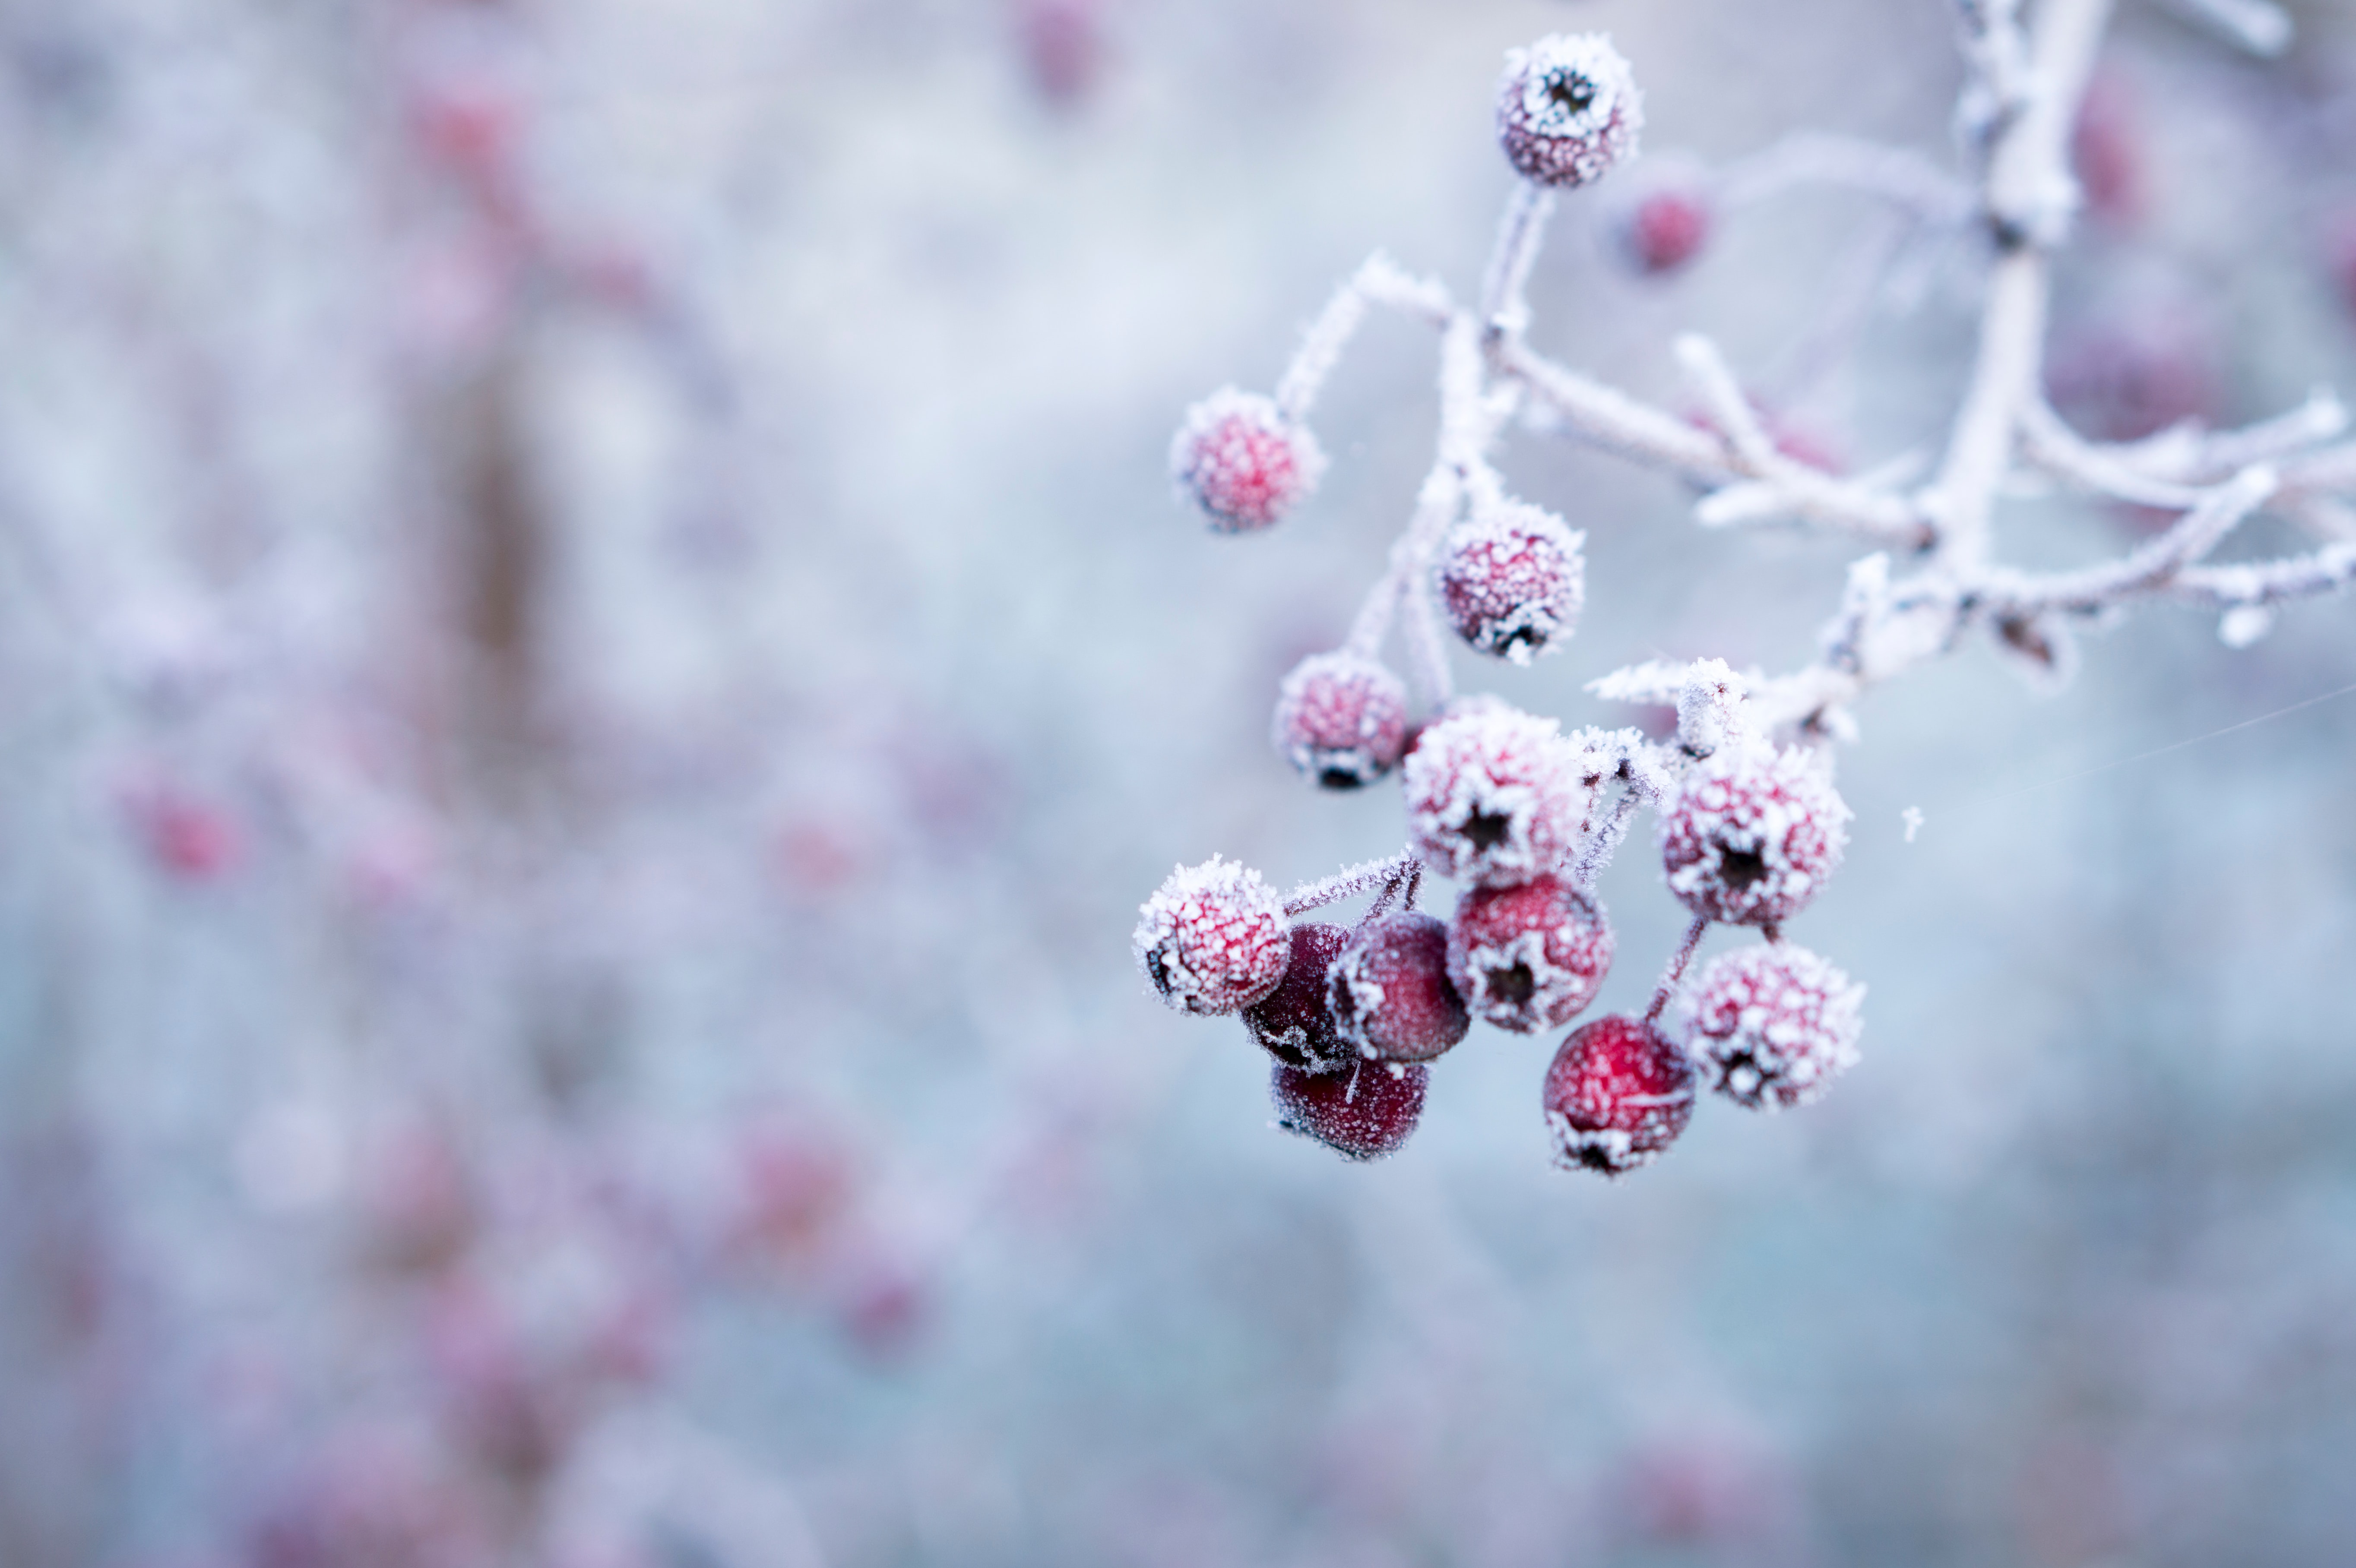 red berries covered in frost